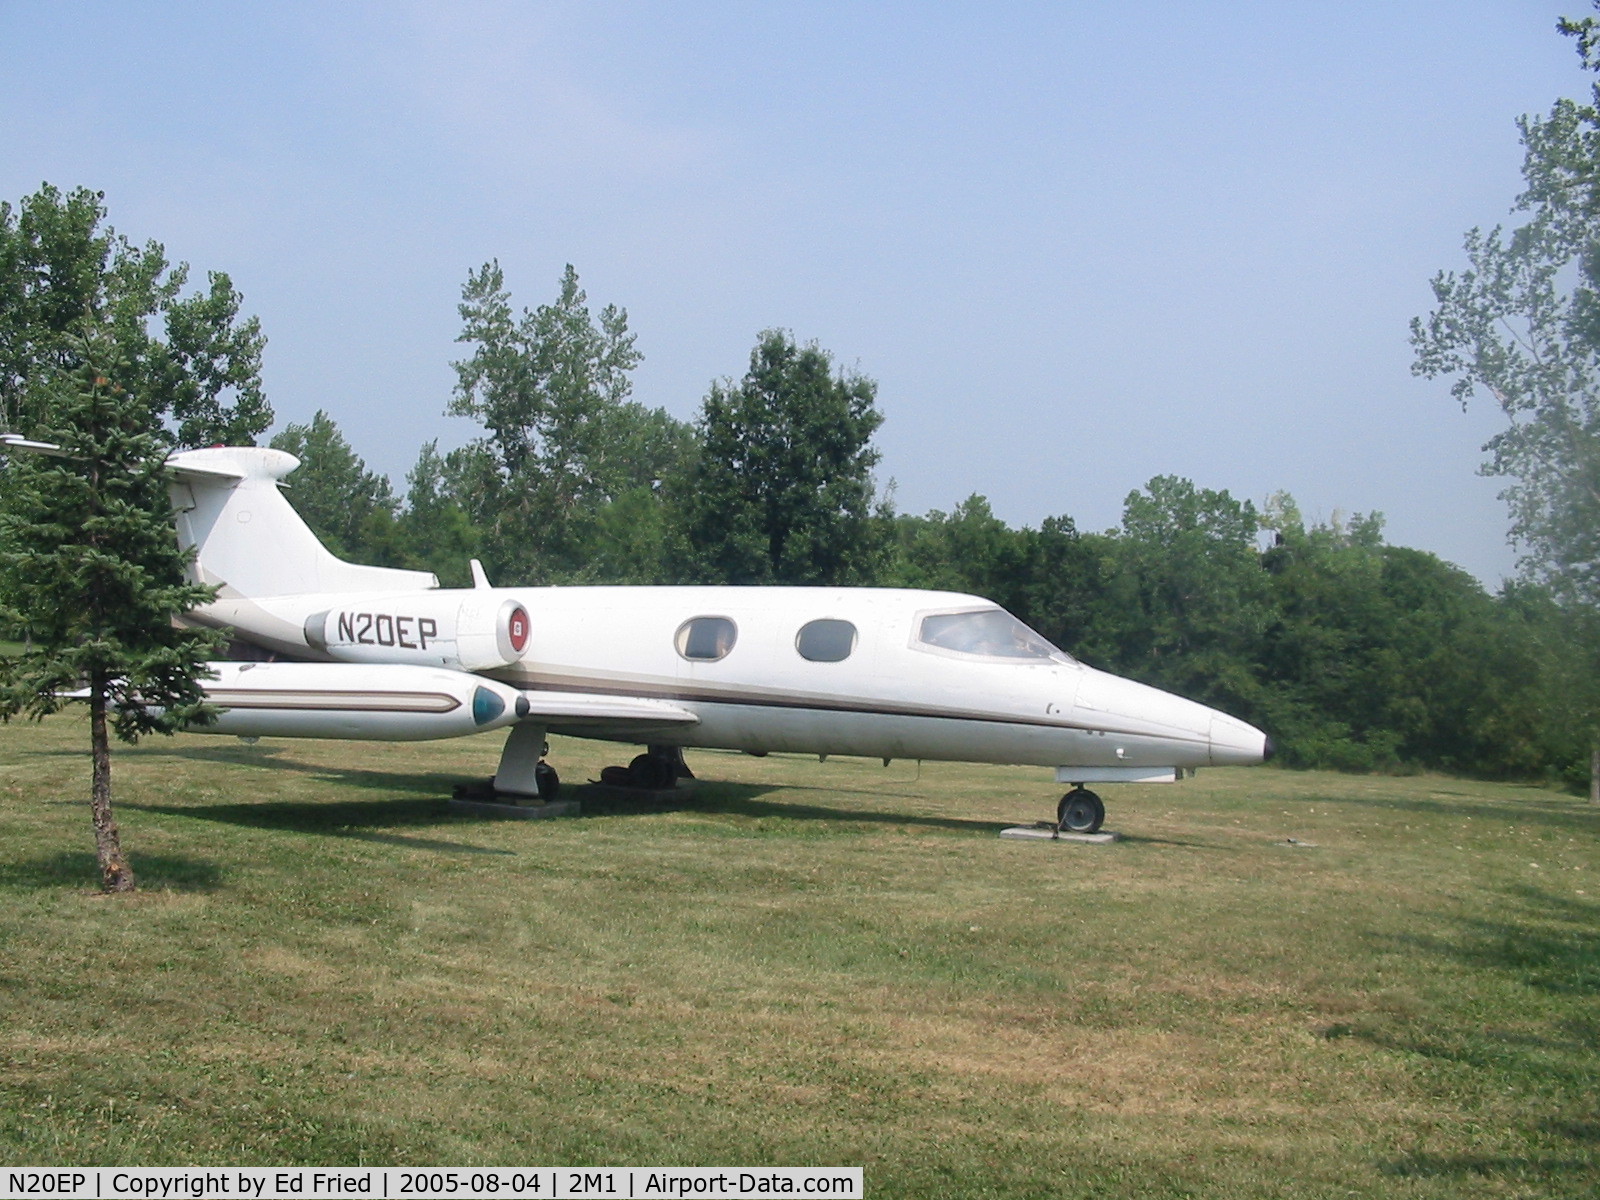 N20EP, 1965 Learjet 23 C/N 23-008, The aircraft is now used as a sign